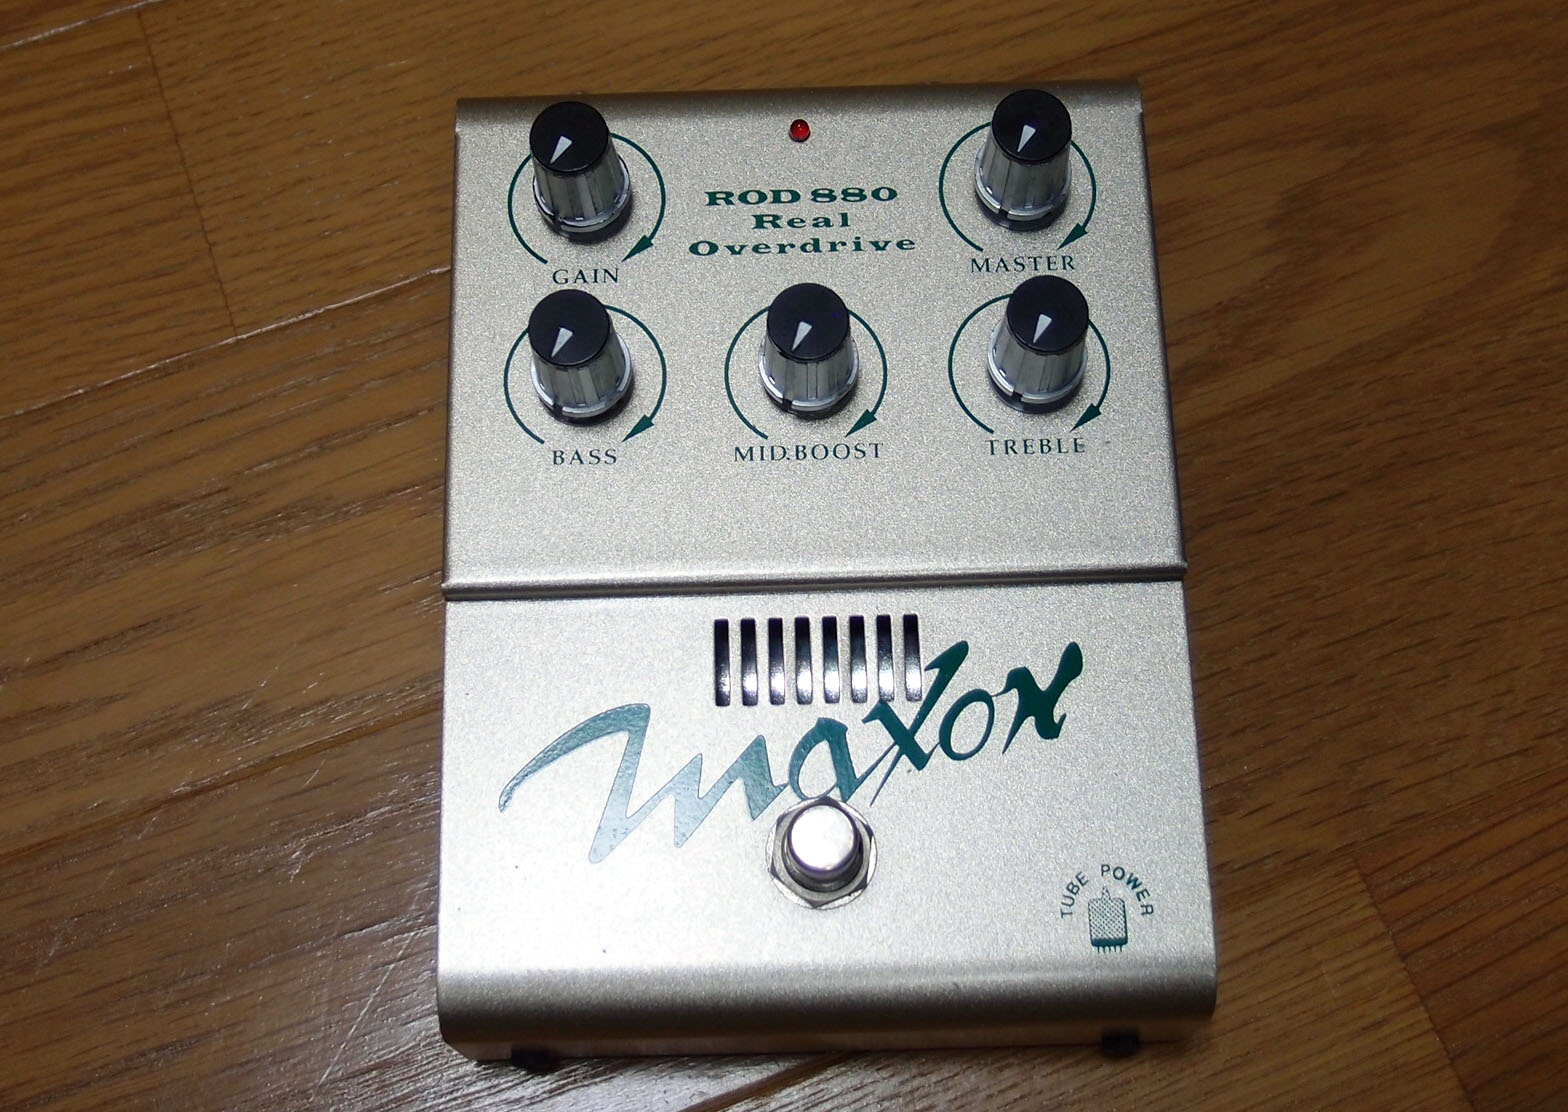 MAXON ROD 880 Real Overdrive マクソン 真空管内蔵